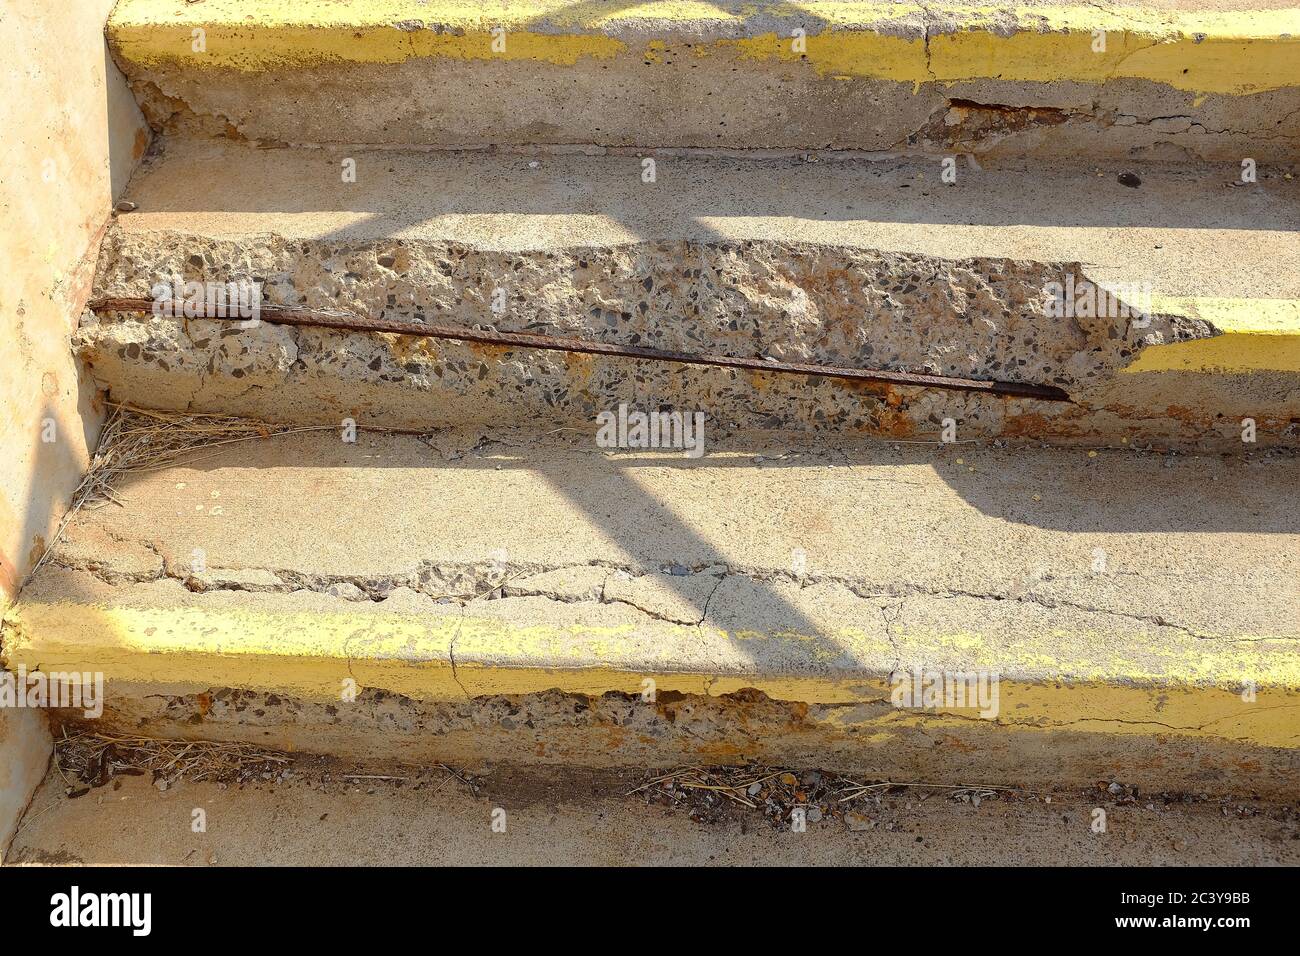 Decaying concrete sidewalk steps in need of replacement can cause injury. American infrastructure needs repair and replacement but government funding Stock Photo